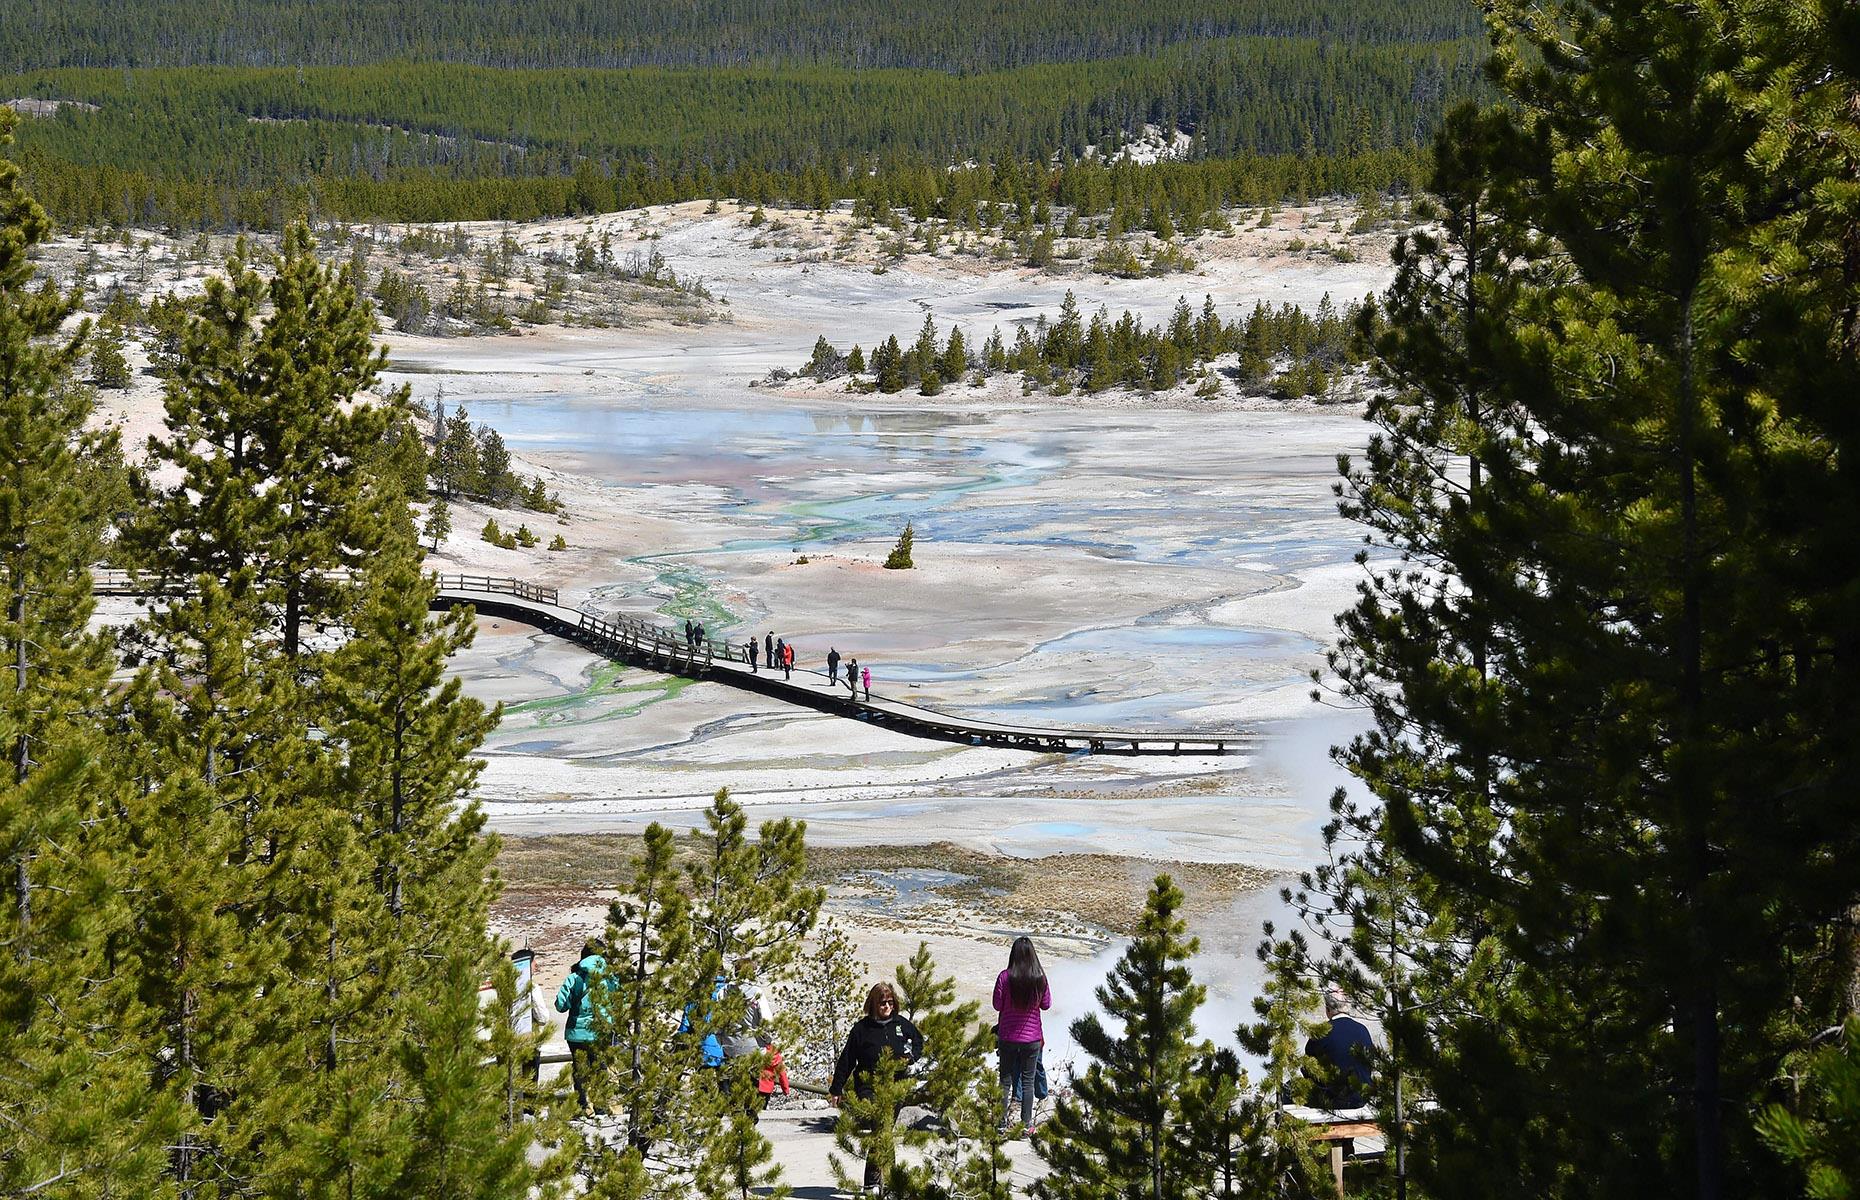 In 2016 – the year this breathtaking aerial shot of Yellowstone's Norris Geyser Basin was taken – the National Park Service celebrated its 100th birthday. Events marked the occasion up and down the country, including in Yellowstone, the oldest park in the system. Here, the landmark Roosevelt Arch was rededicated and the NPS Centennial Yellowstone Junior Ranger Program was a hit with kids.